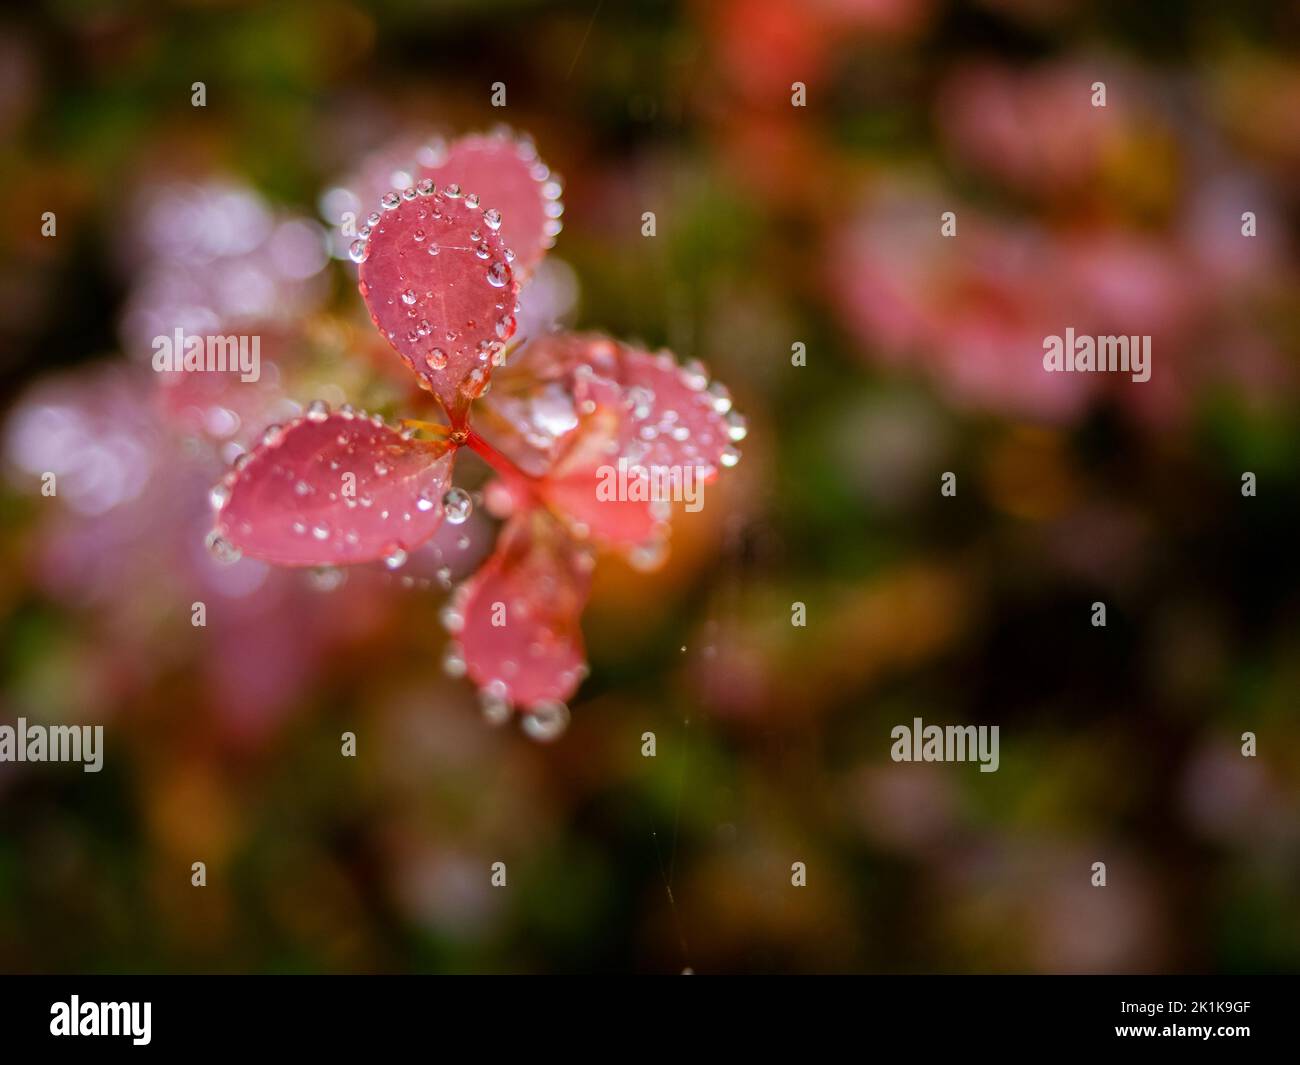 tiny twig of a shrub with small red leaves after rain, raindrops on a leaves. deep moody autumn season Stock Photo